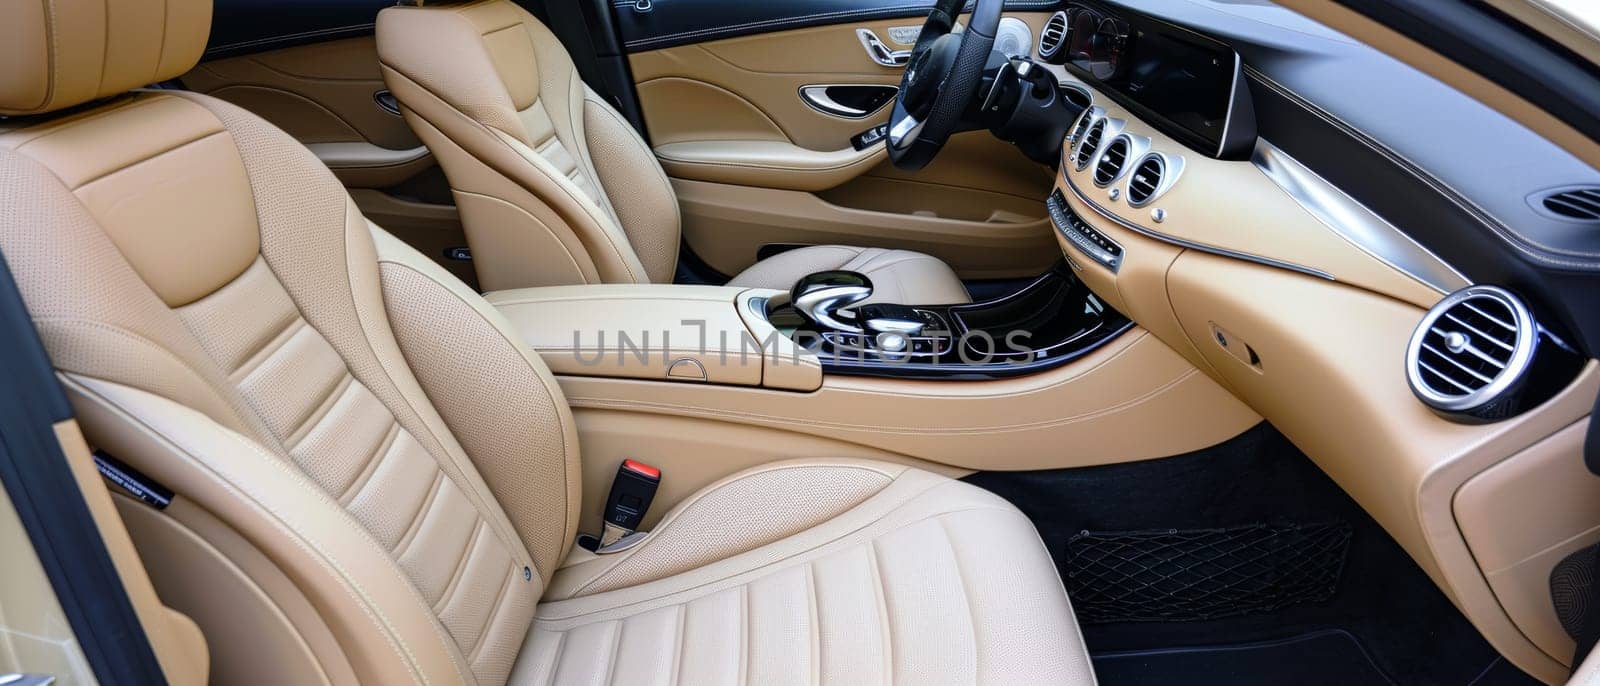 The opulent interior of a vehicle is bathed in warm tones, highlighting the fine leather seats and meticulous attention to detail, a hallmark of luxury and comfort in upscale automotive design. by sfinks